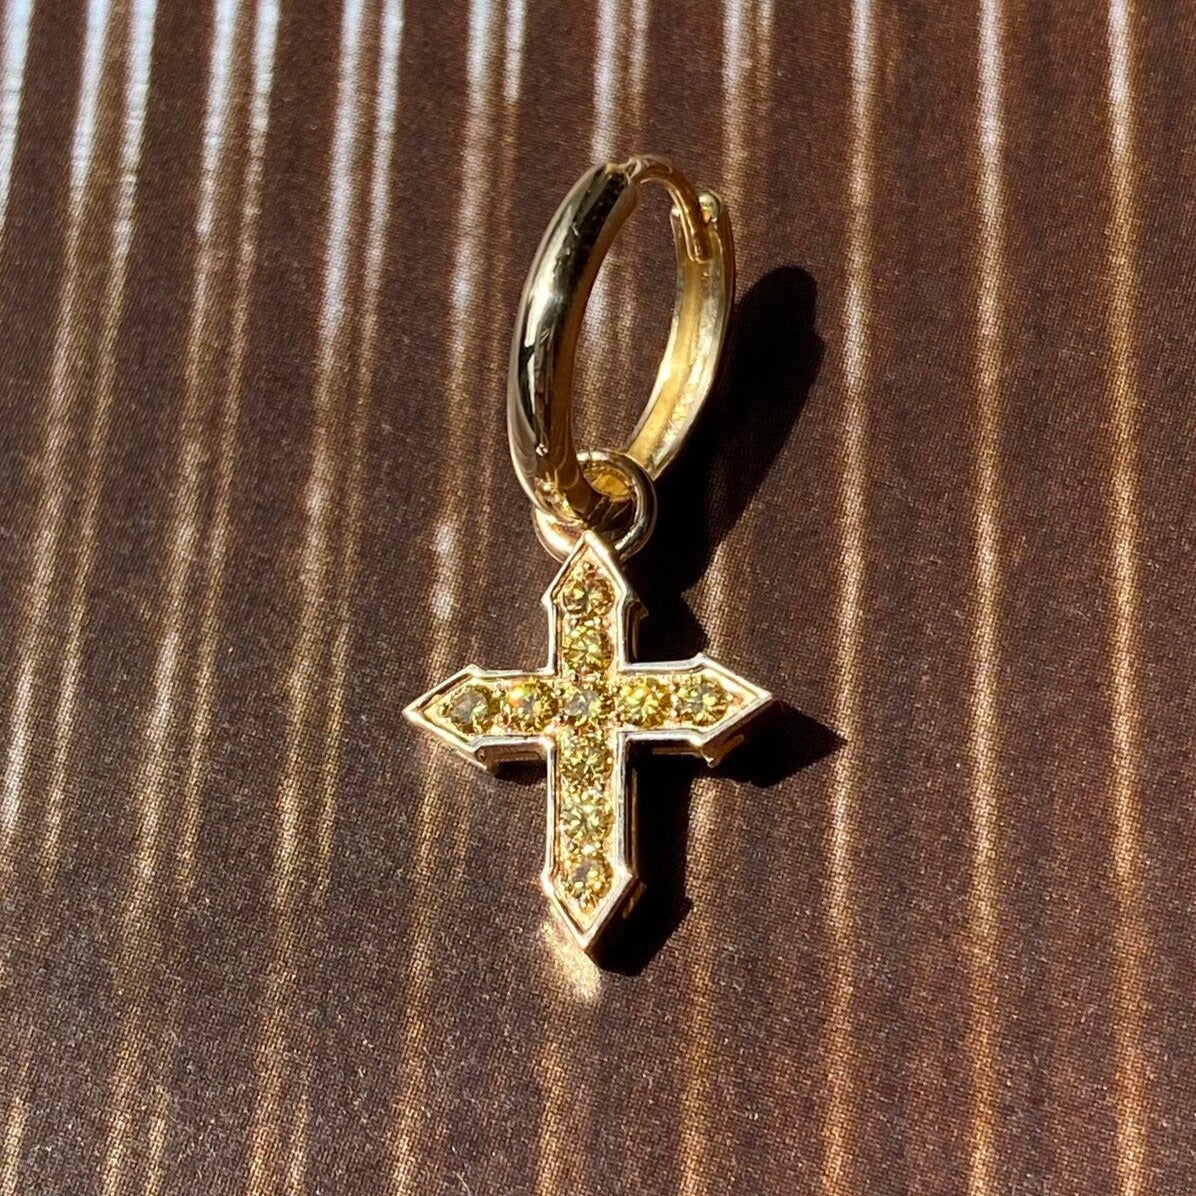 EARRING CROSS "GLOW" WITH ROYAL YELLOW DIAMONDS / SOLID GOLD